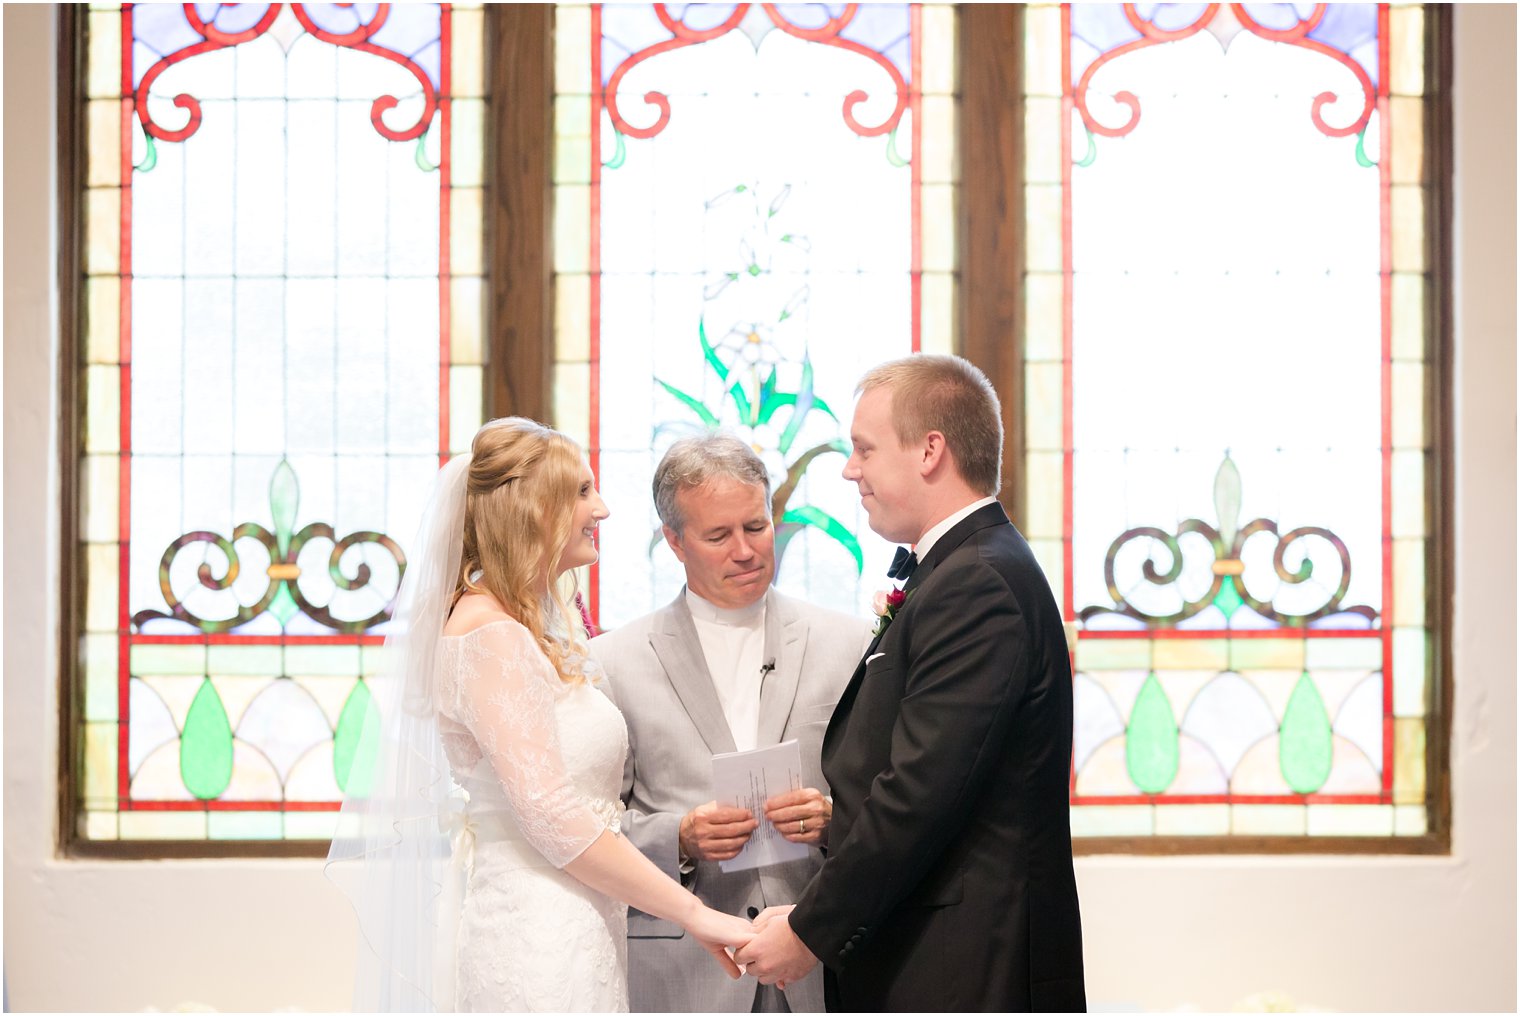 Exchanging vows at Hopewell Presbyterian Church Wedding Ceremony